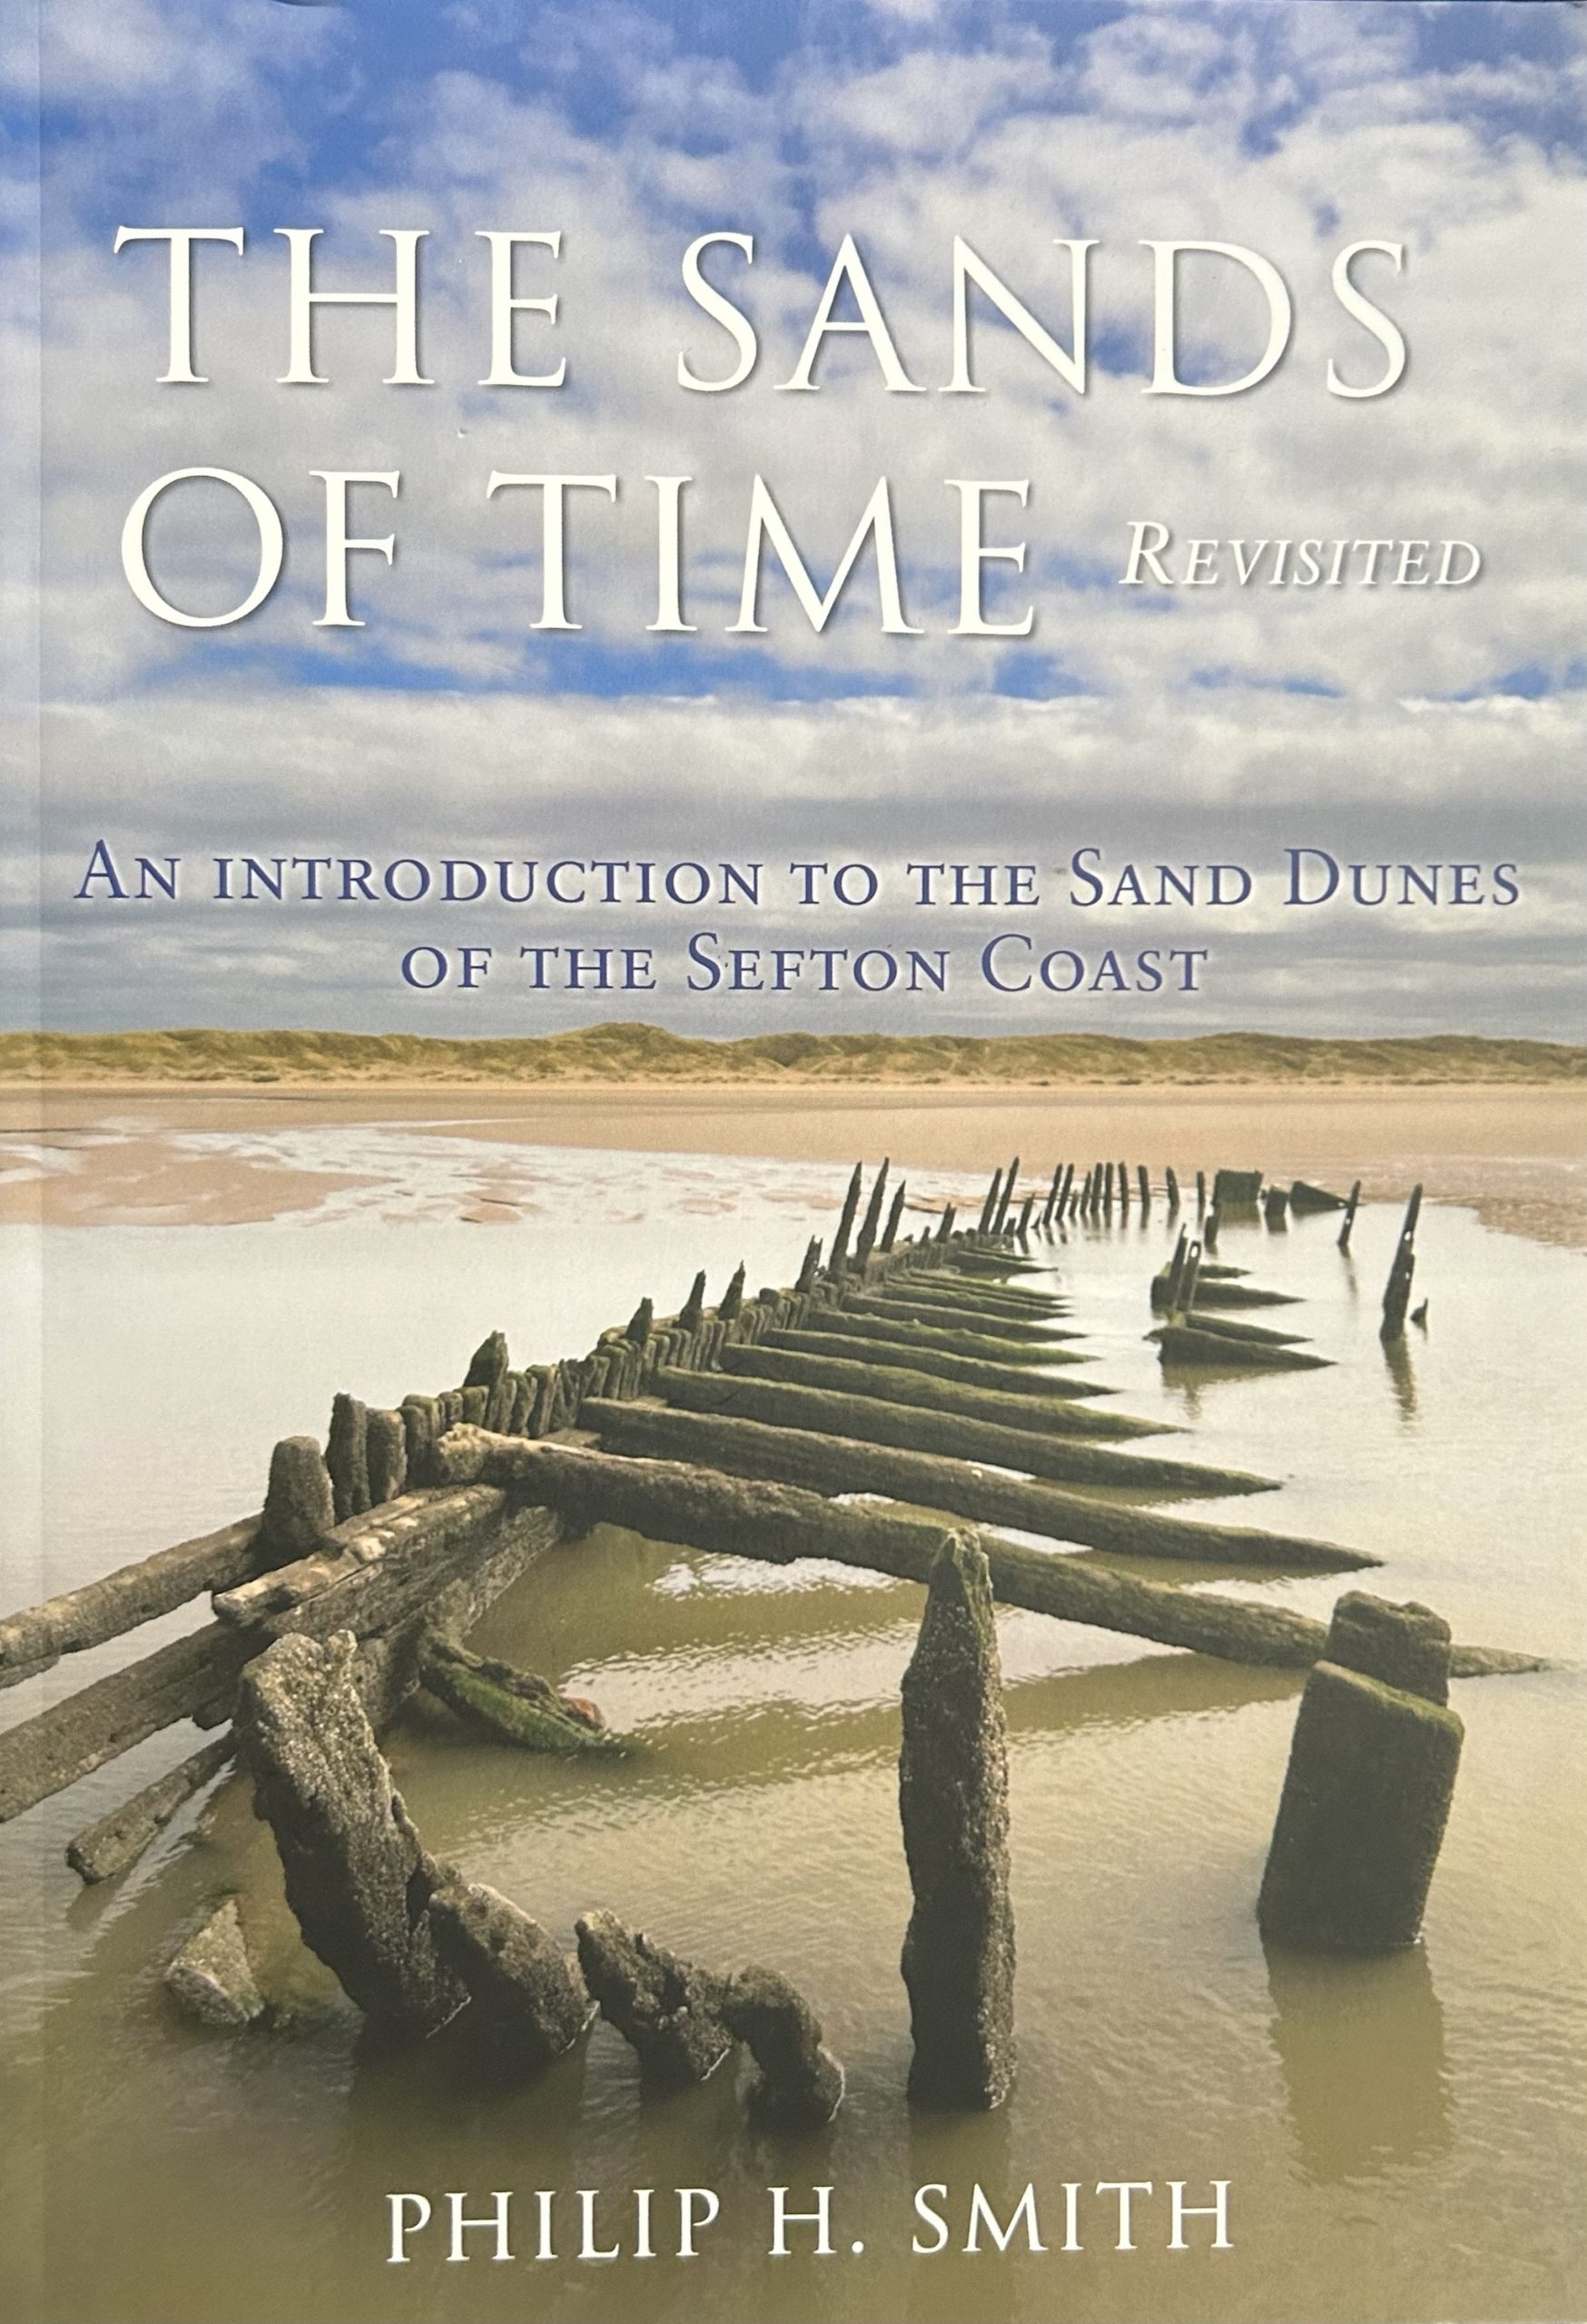 The Sands of Time Revisited: An Introduction to the Sand Dunes of the Sefton Coast